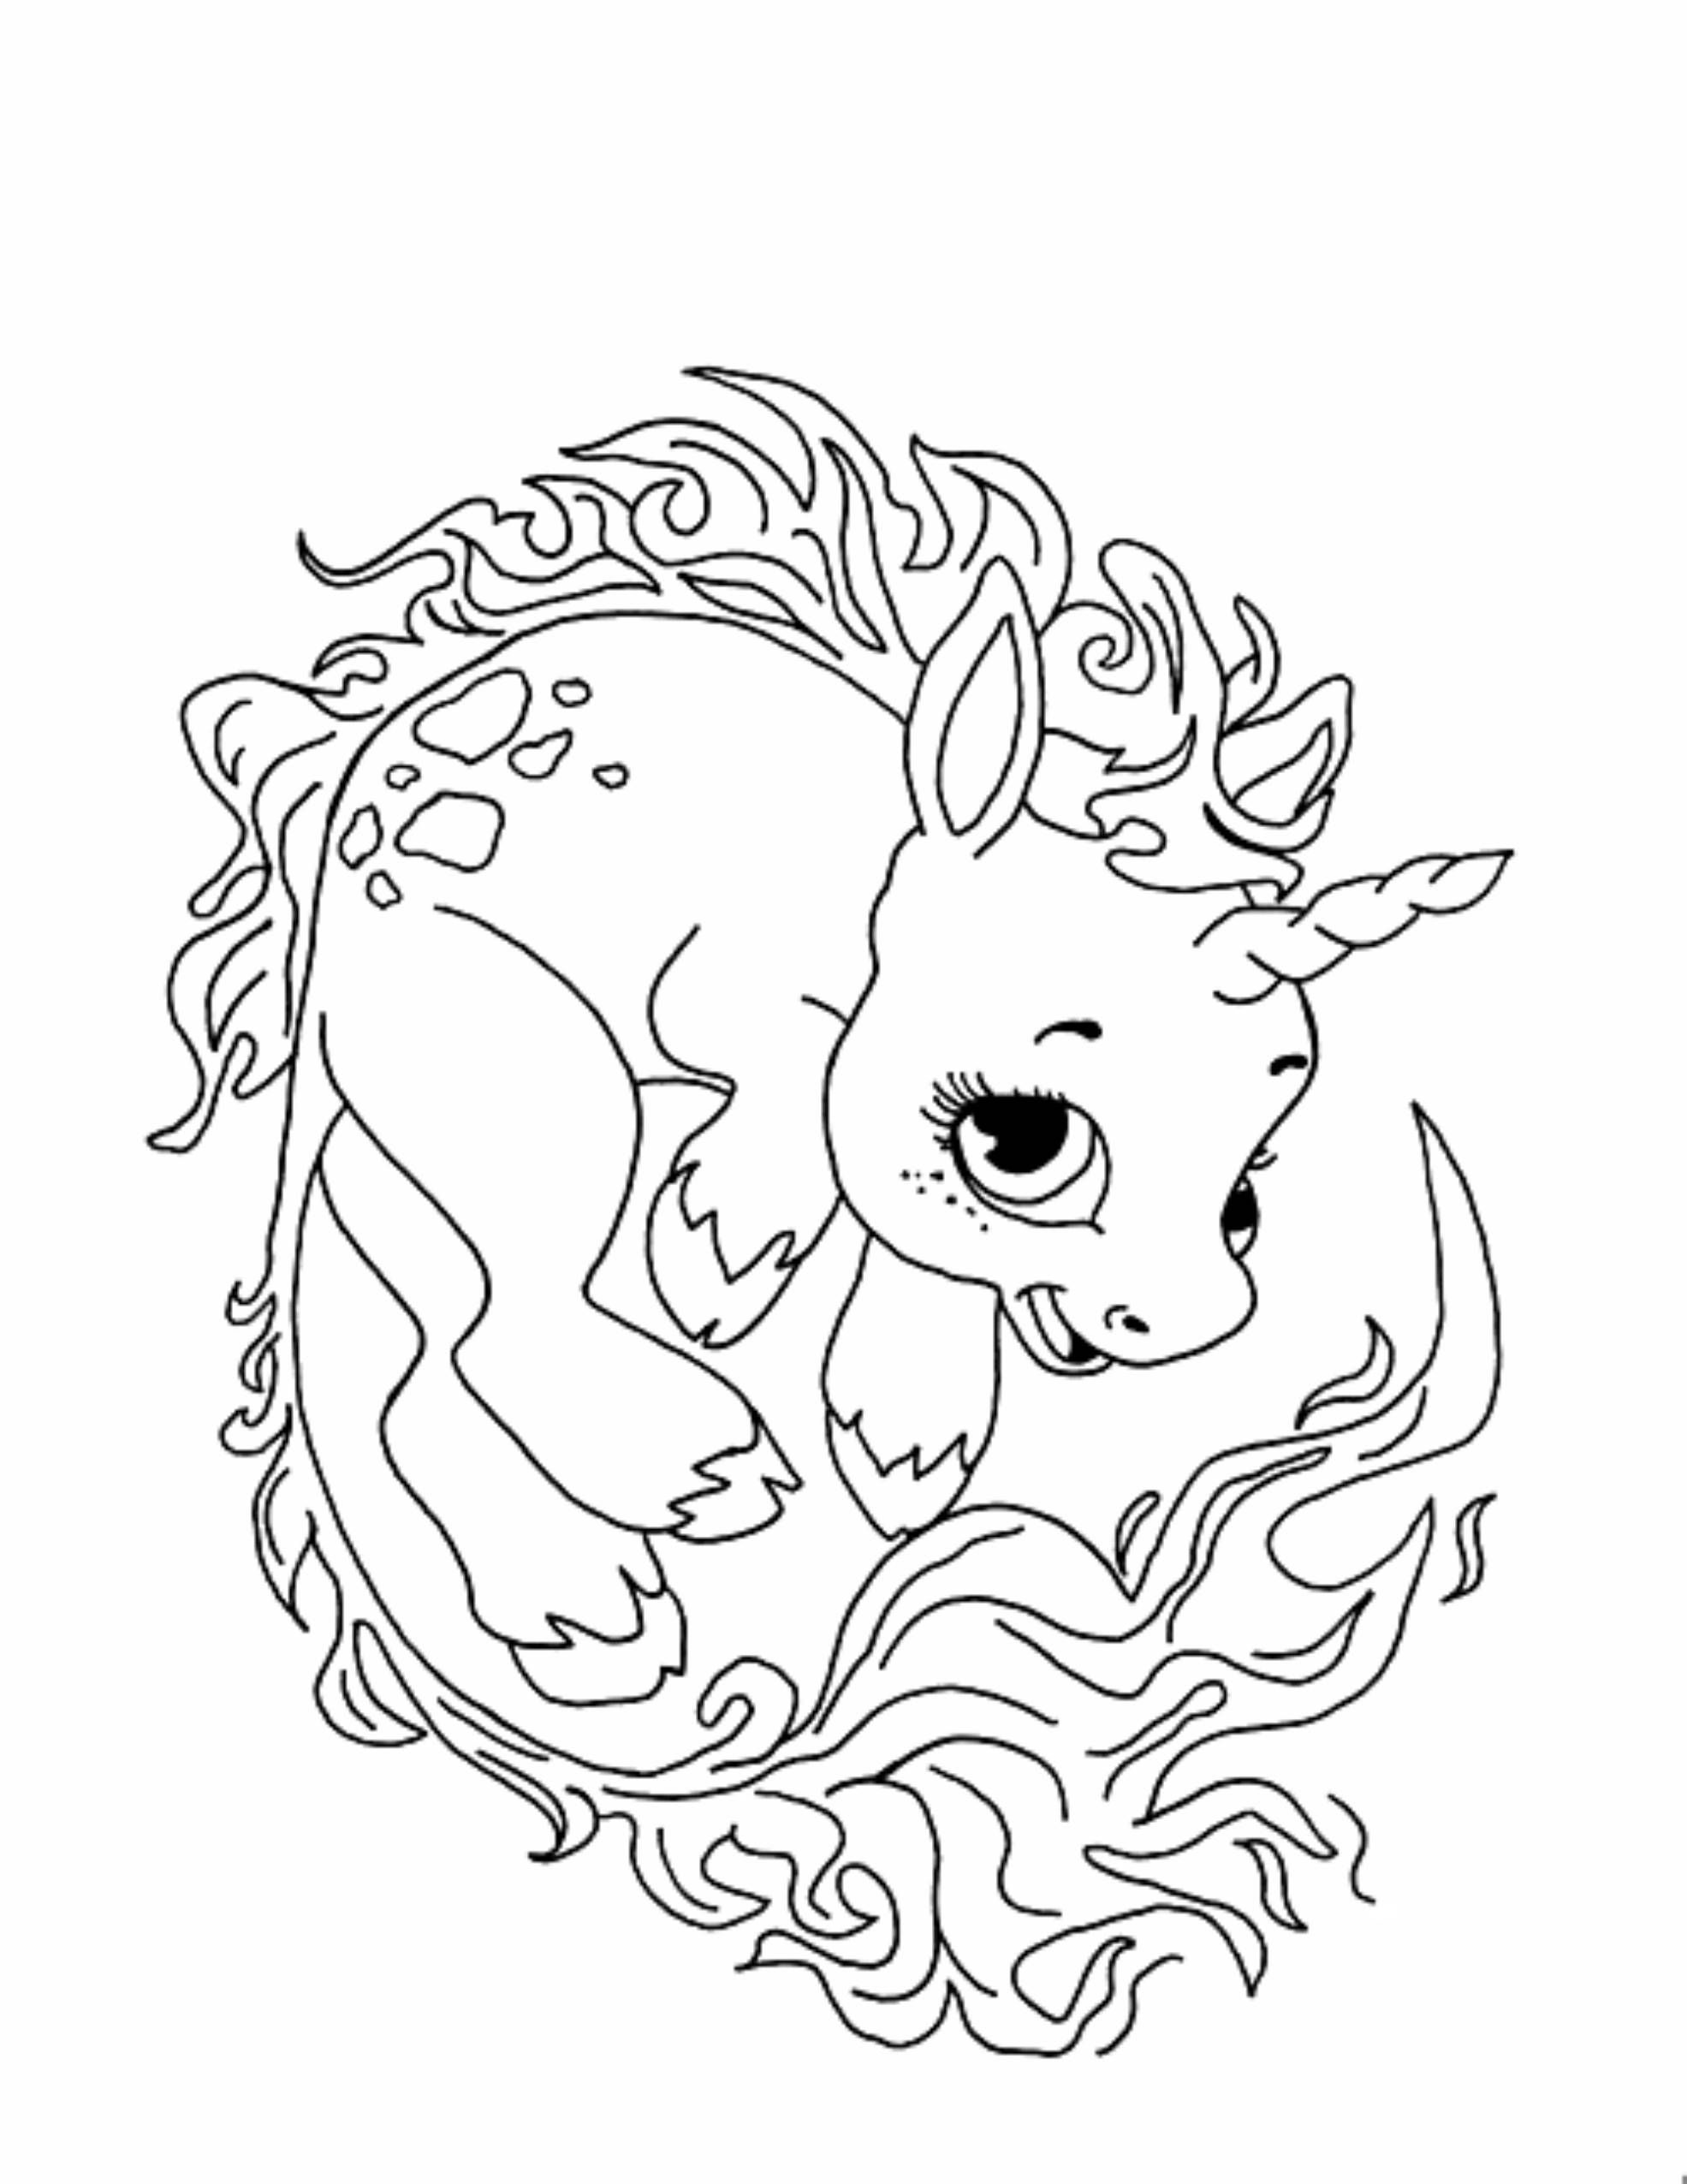 Cute Unicorn Coloring Page - Free Printable Coloring Pages for Kids